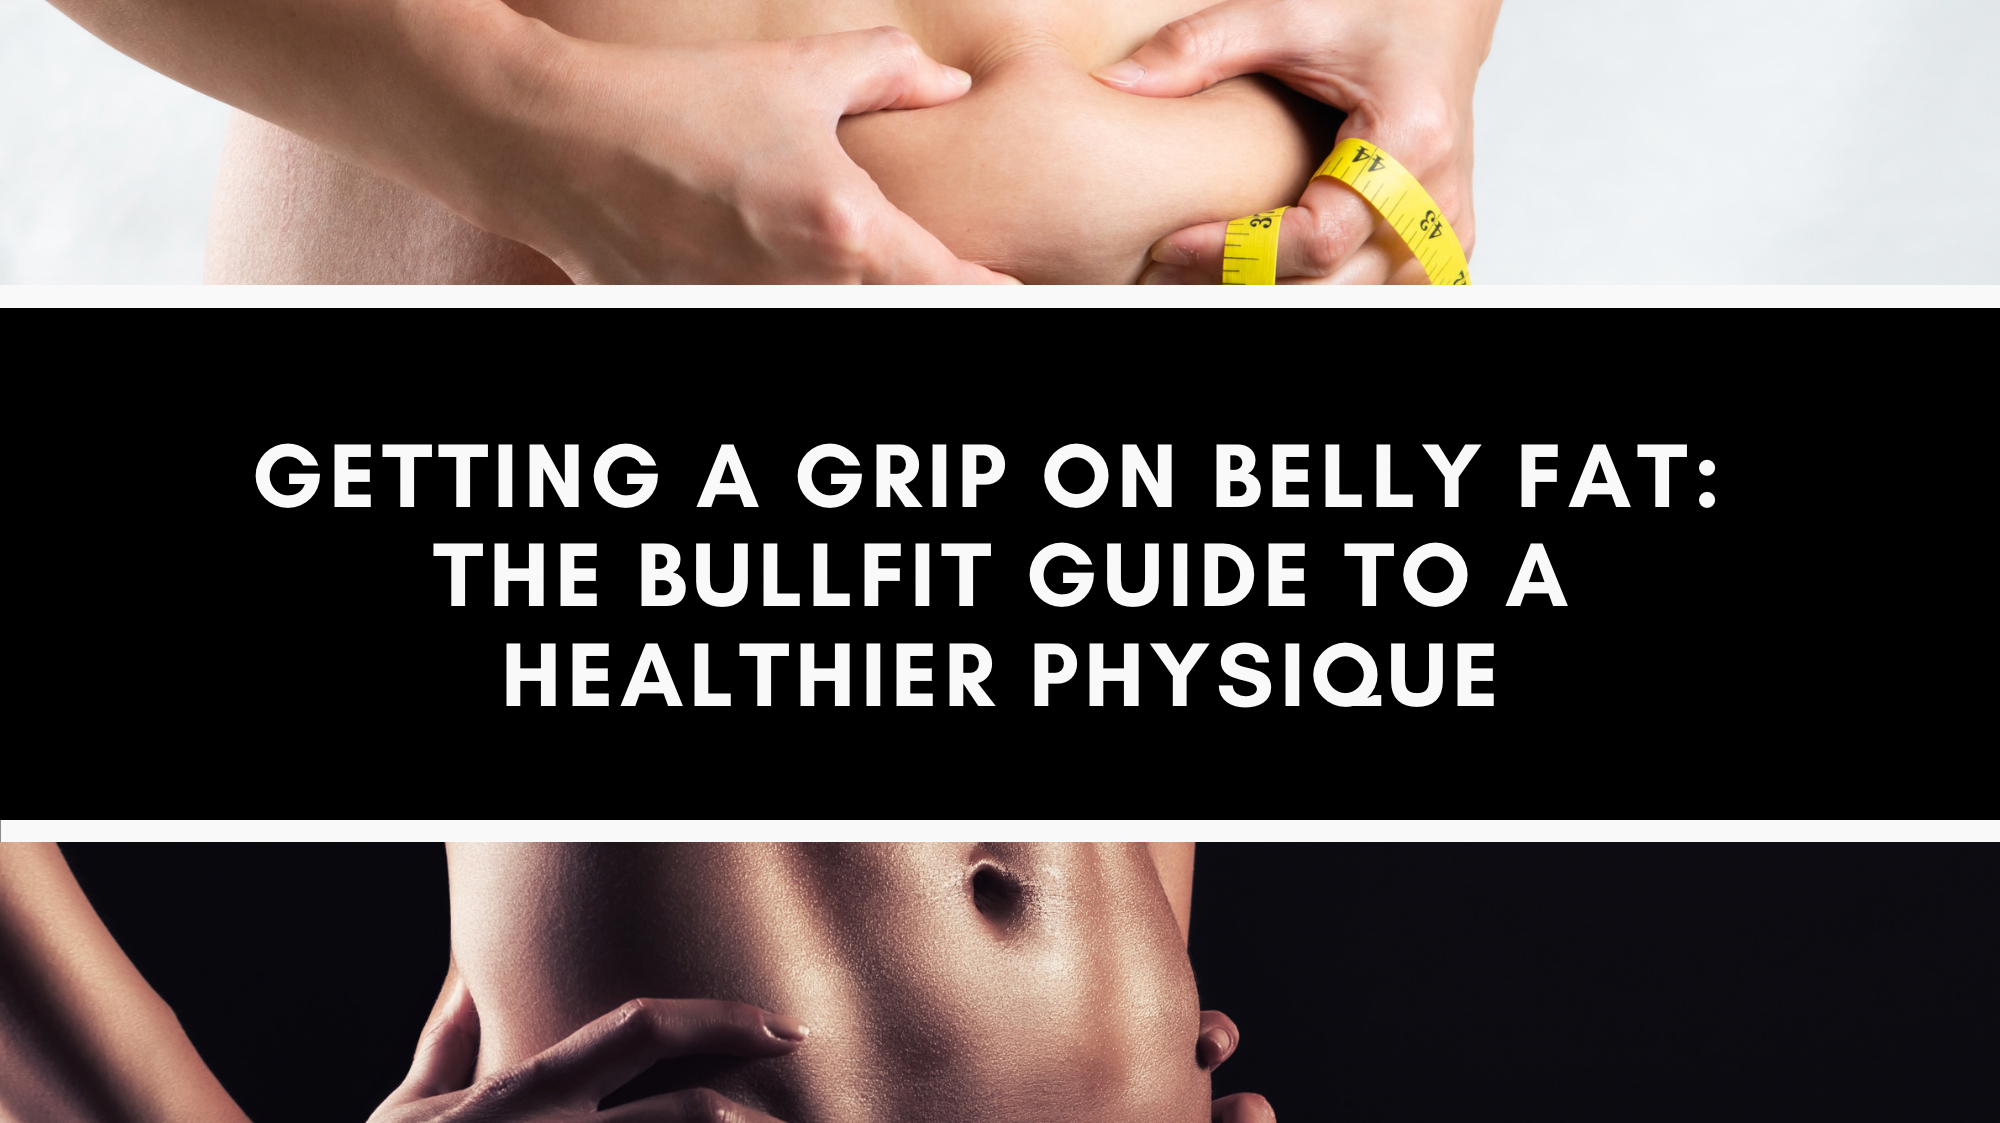 Getting a Grip on Belly Fat: The BullFit Guide to a Healthier Physique